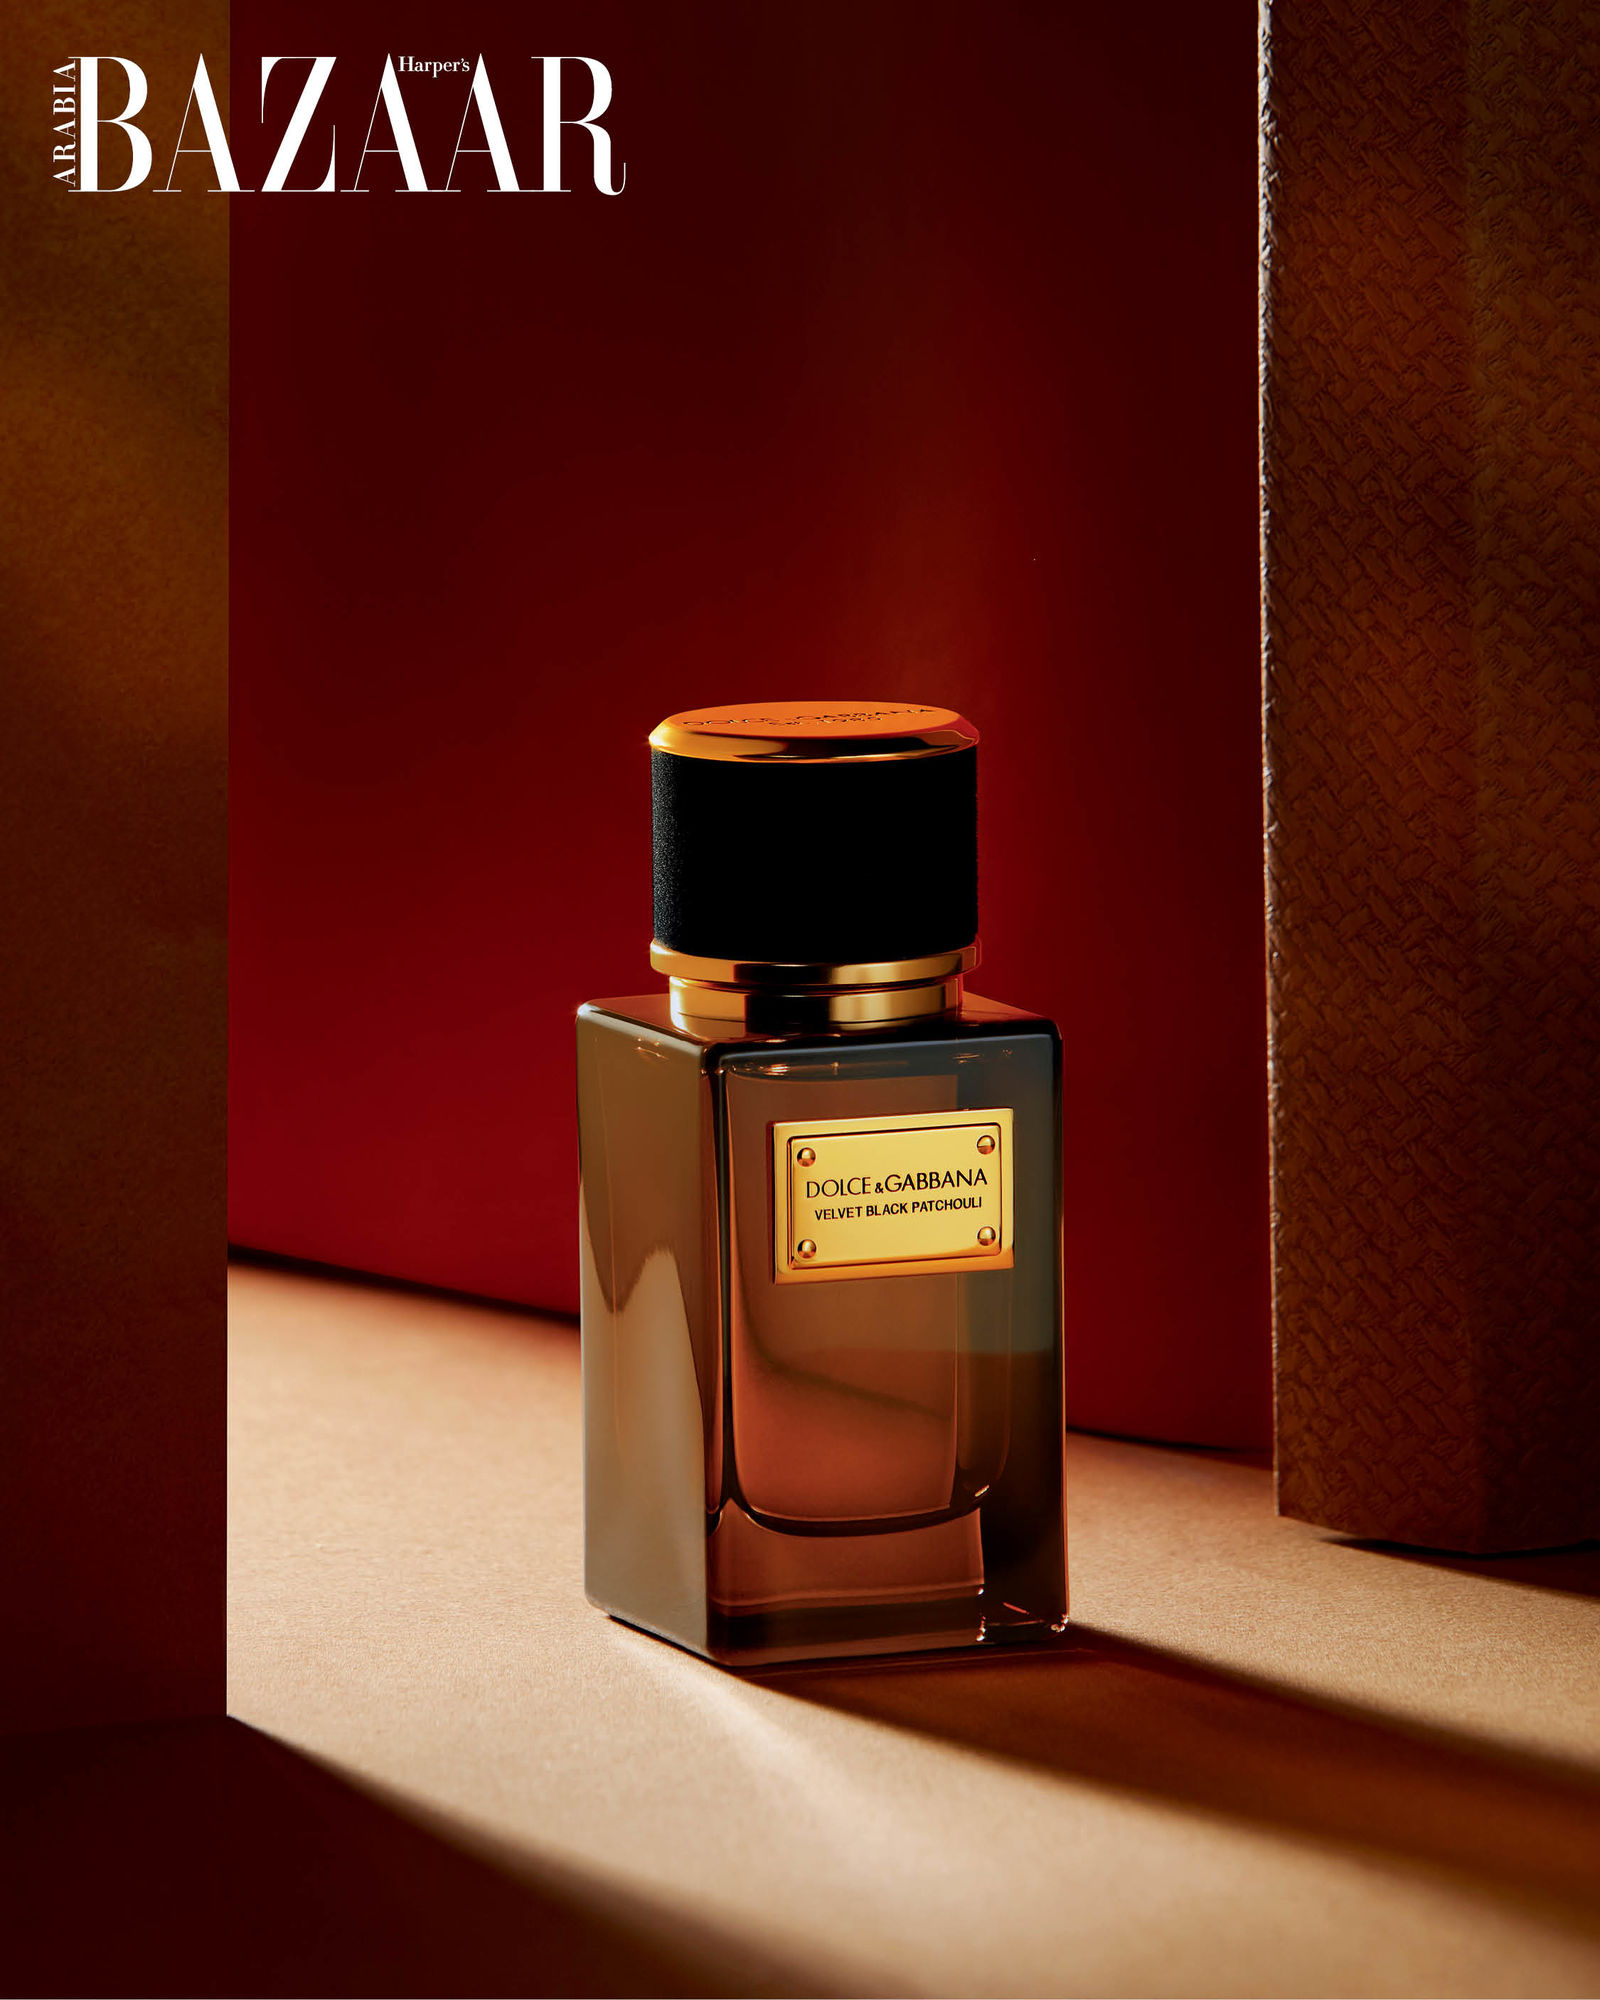 Why Dolce&Gabbana's Velvet Black Patchouli Will Take You On A Mythical  Journey With The Power of Scent | Harper's Bazaar Arabia